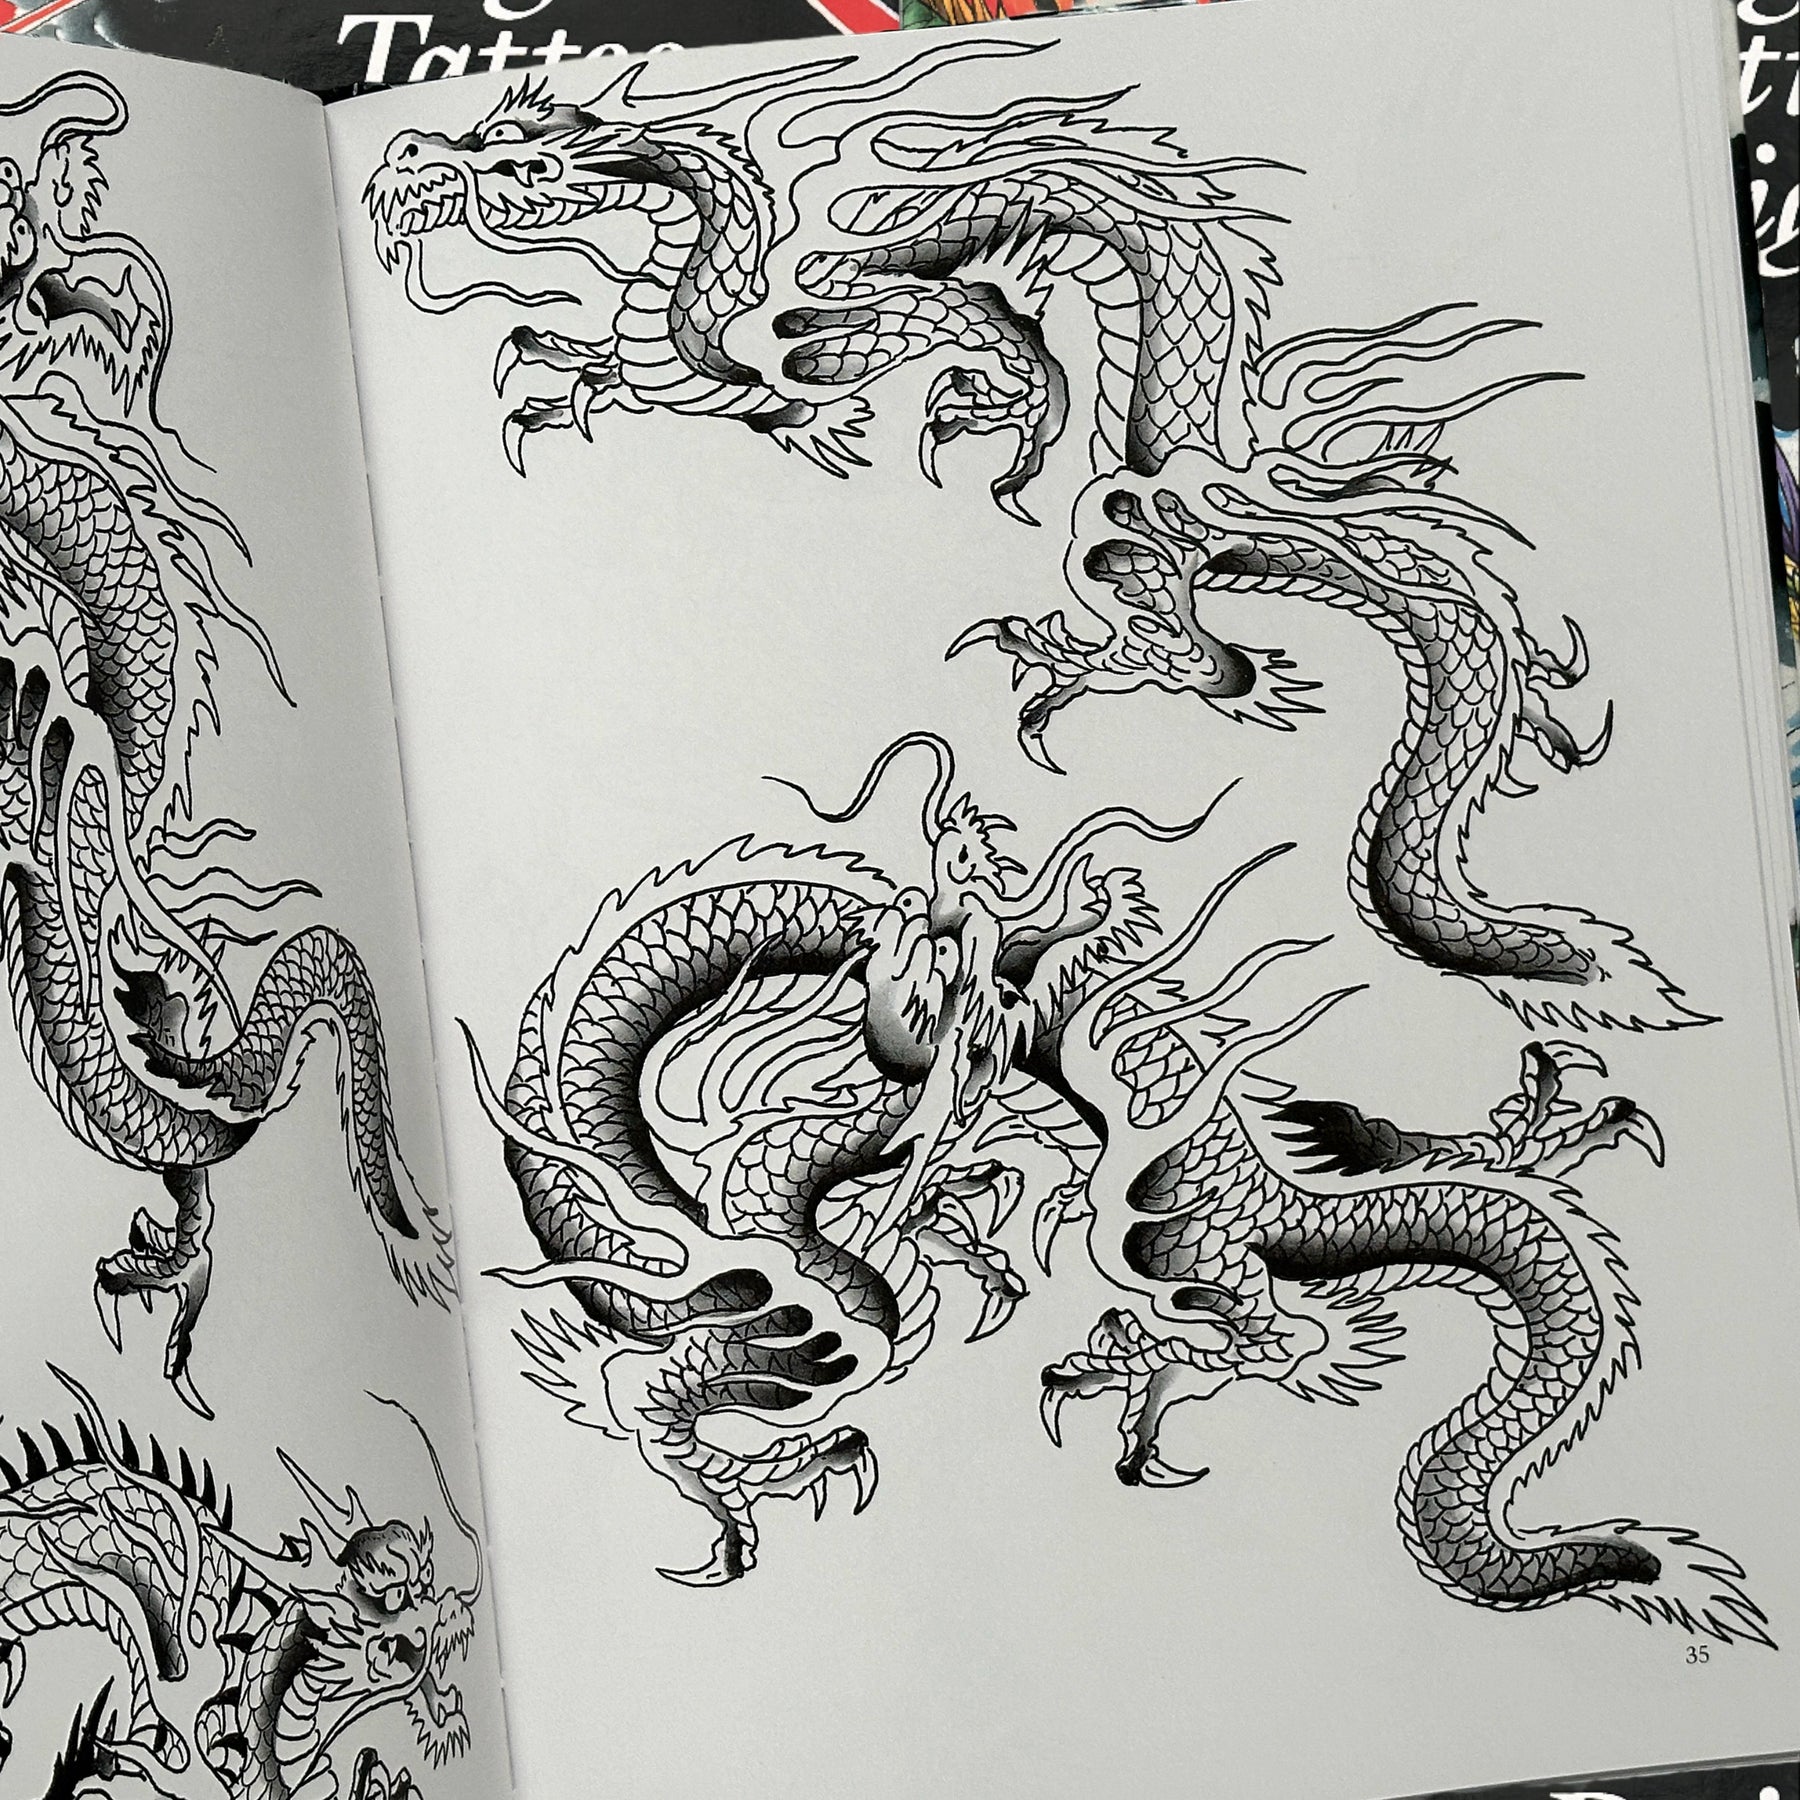 Chinese Dragon Tattoo Designs and Their Meanings | Art and Design